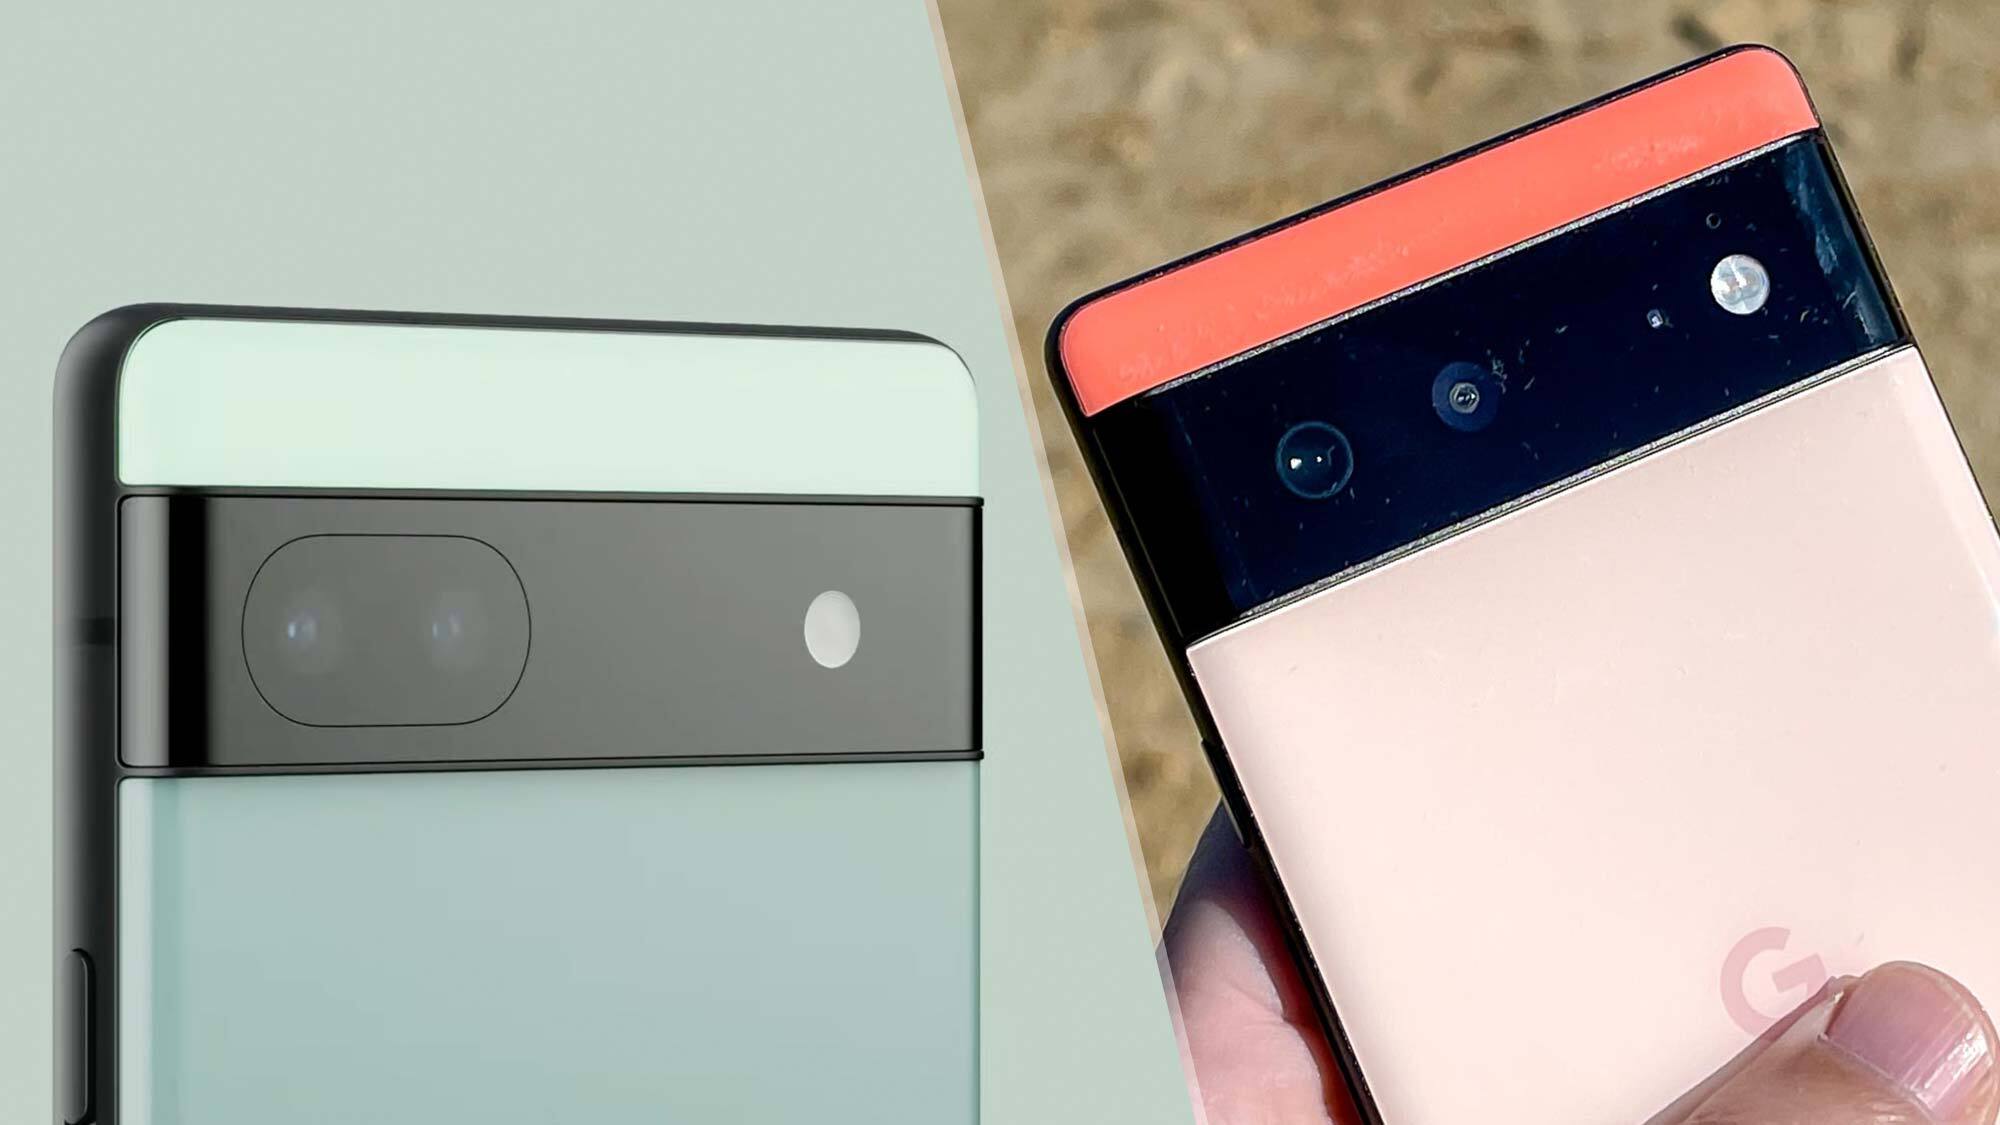 A composite image of an official Google Pixel 6a render and a real-life image of the Pixel 6.